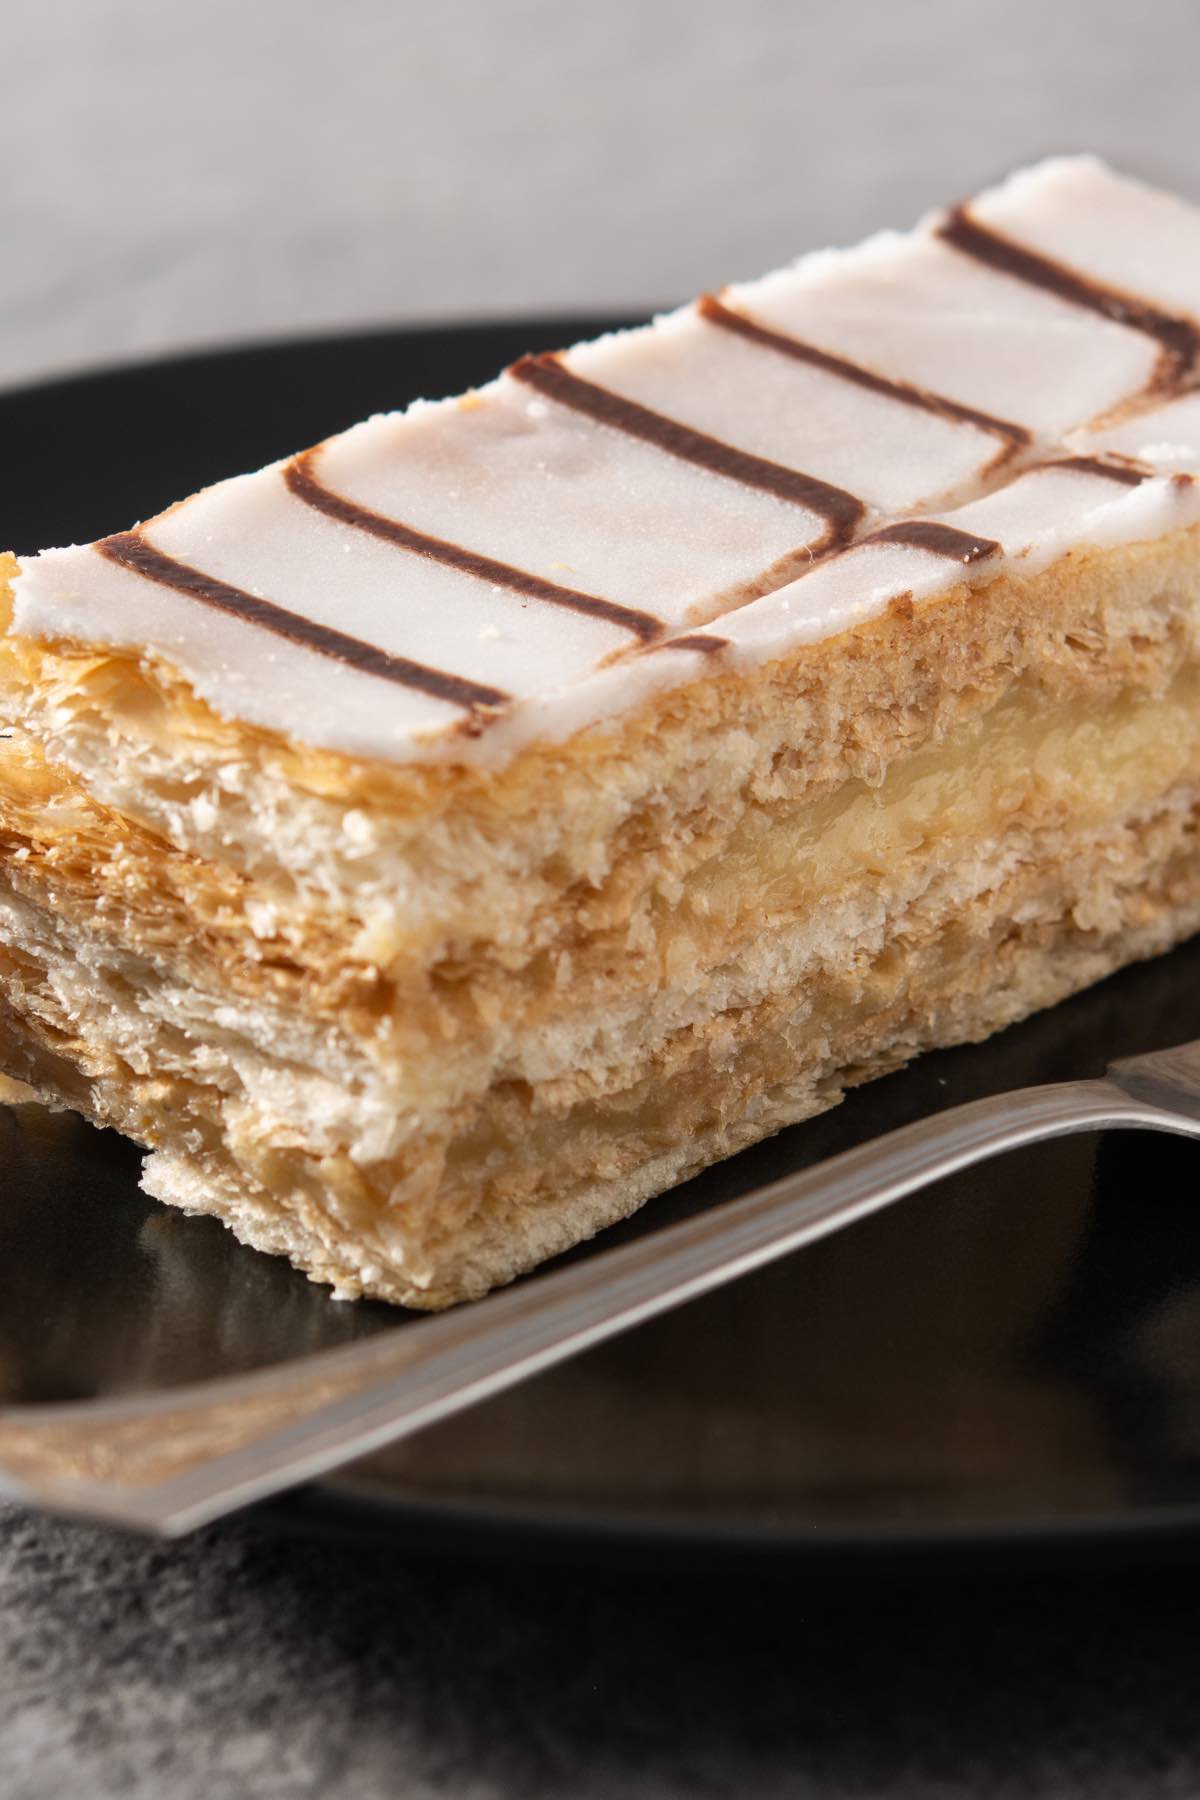 Napoleon Dessert is a classic blend of flaky pastry and creamy filling with a rich yet light taste and texture. Similar to Mile Feuille, it can be paired with tea or coffee for a great afternoon treat or an after-dinner dessert.